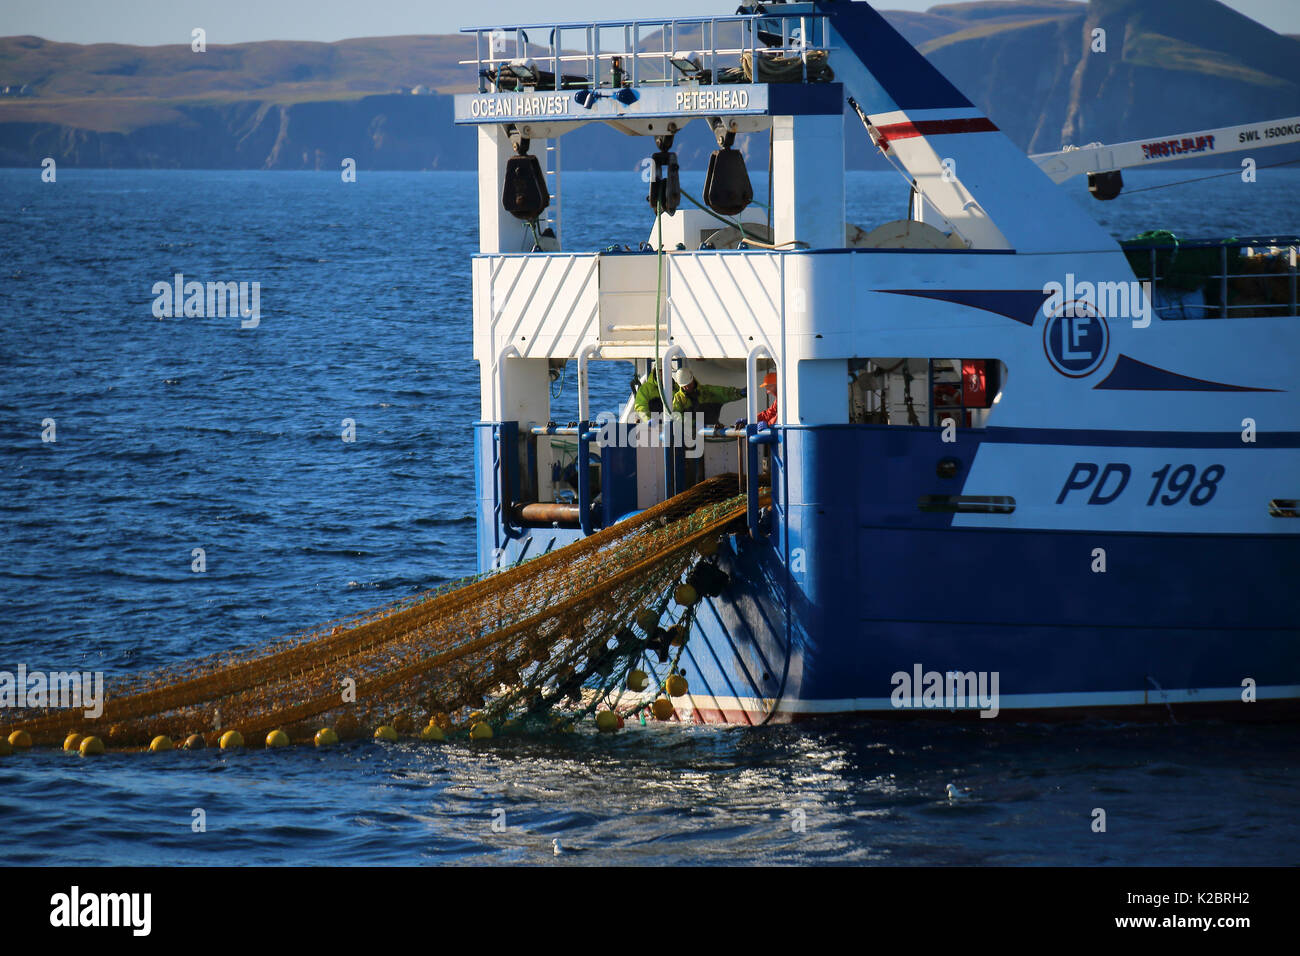 Fishing vessel 'Ocean Harvest' working in calm conditions with Fair Isle in the distance. North Sea, UK, August 2014. Property released.  All non-editorial uses must be cleared individually. Stock Photo